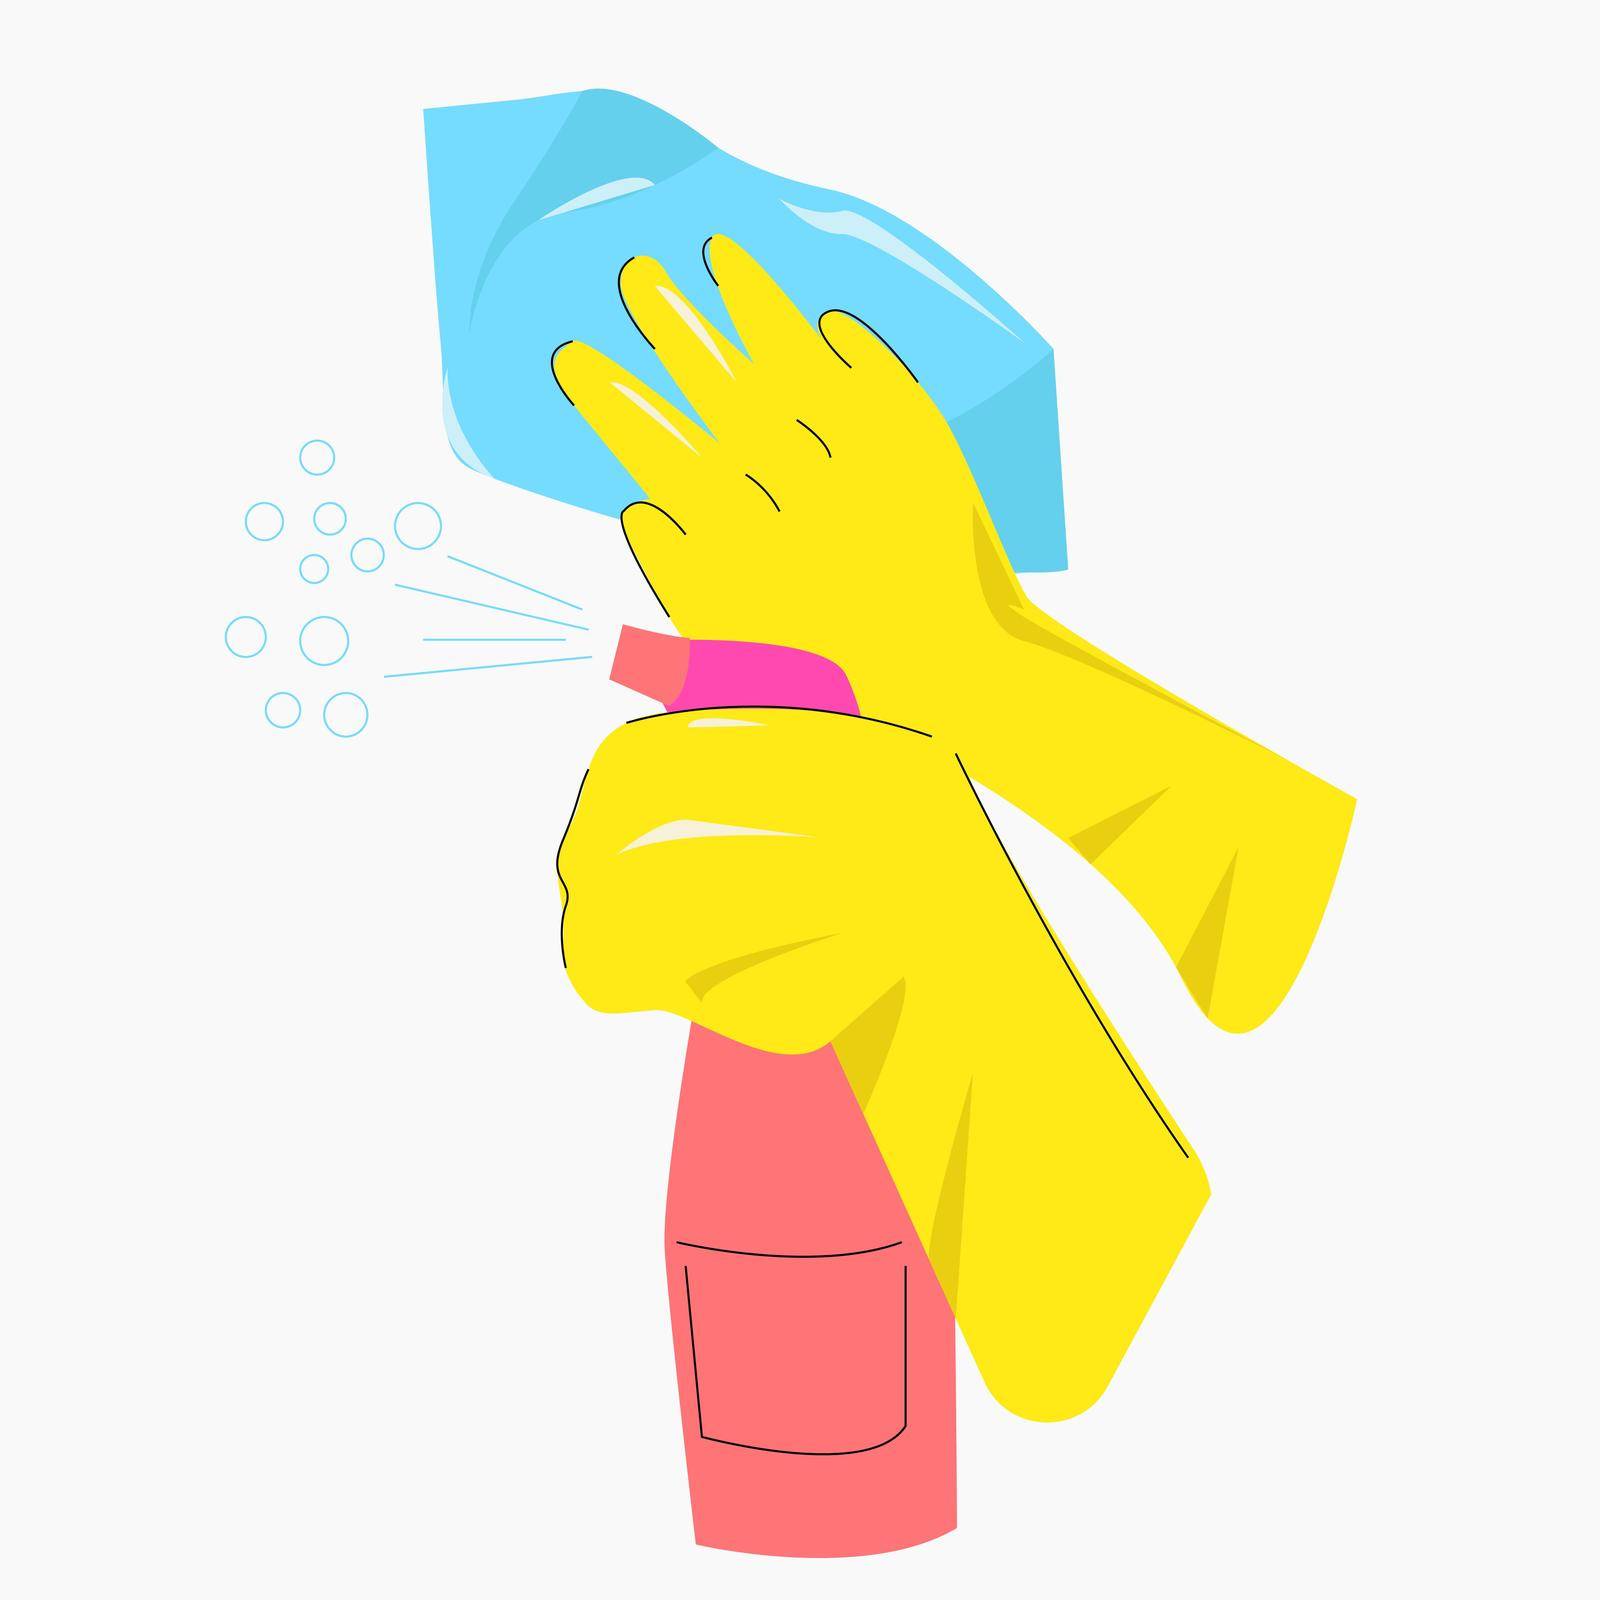 Hands in yellow gloves and with a spray bottle and a cloth. Illustration of washing windows or cleaning other surfaces with a liquid